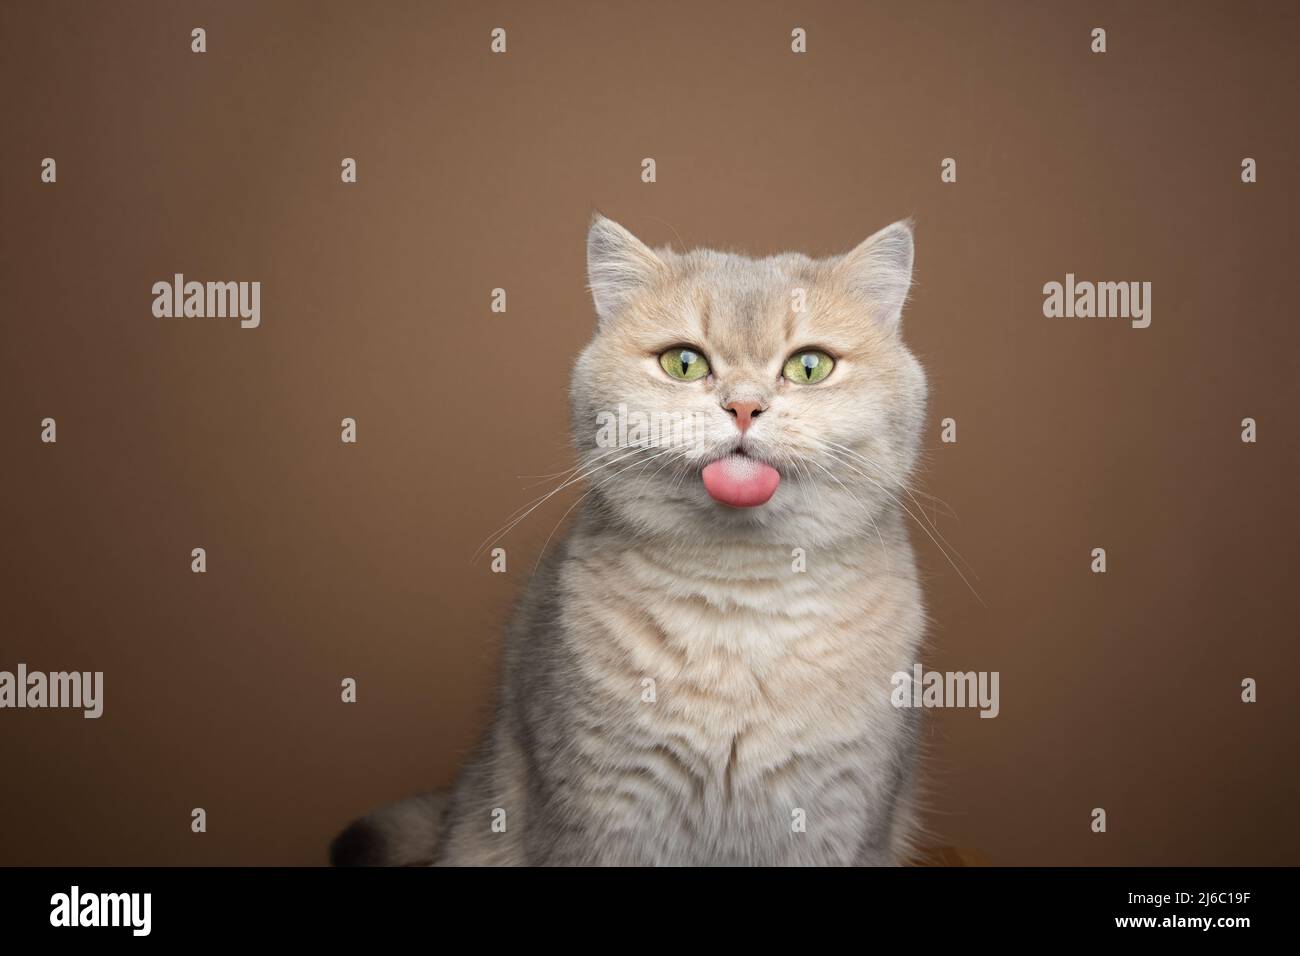 naughty british shorthair cat sticking out tongue on brown background with copy space Stock Photo